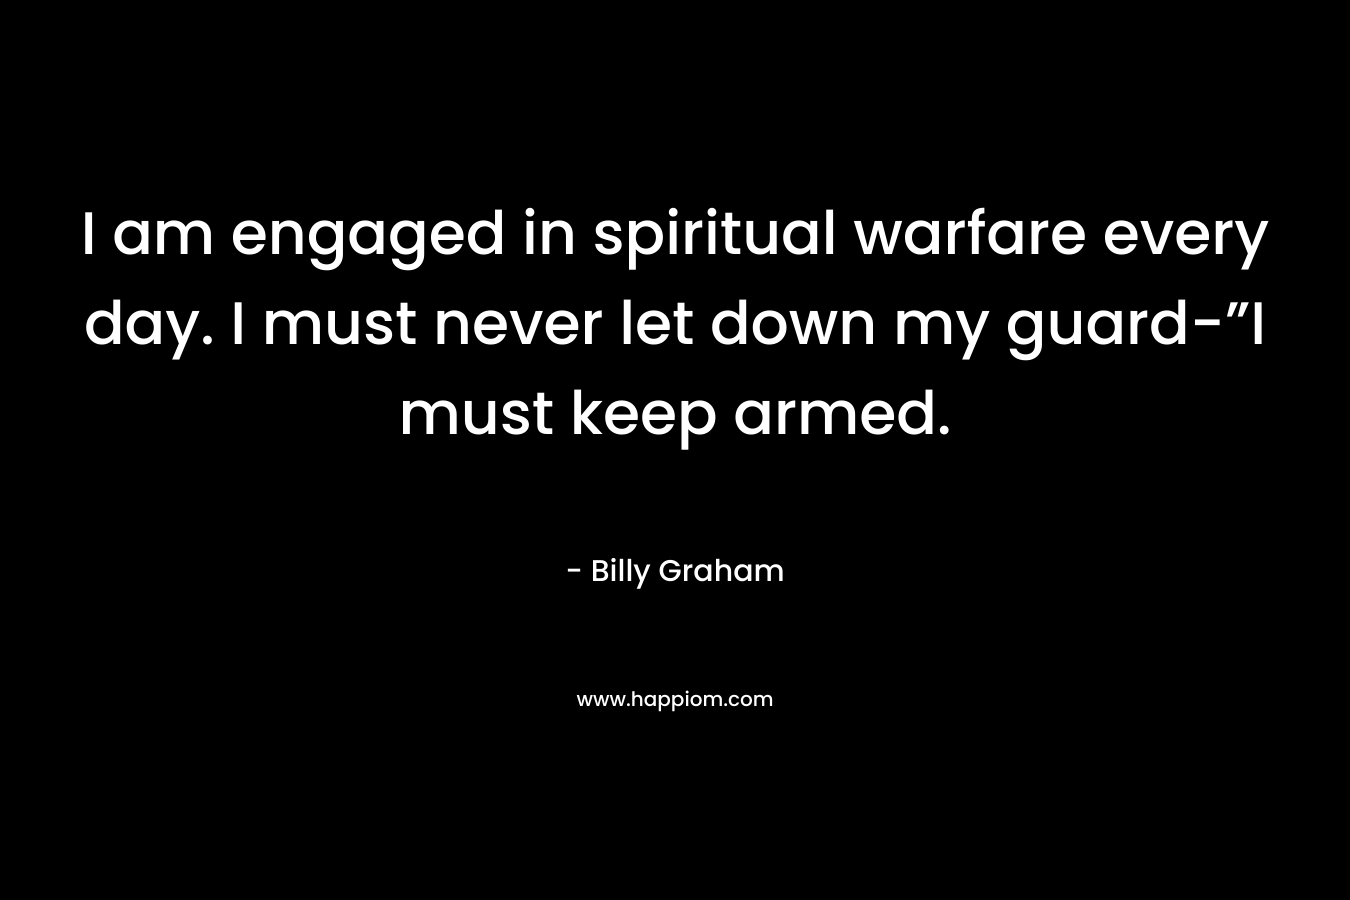 I am engaged in spiritual warfare every day. I must never let down my guard-”I must keep armed.